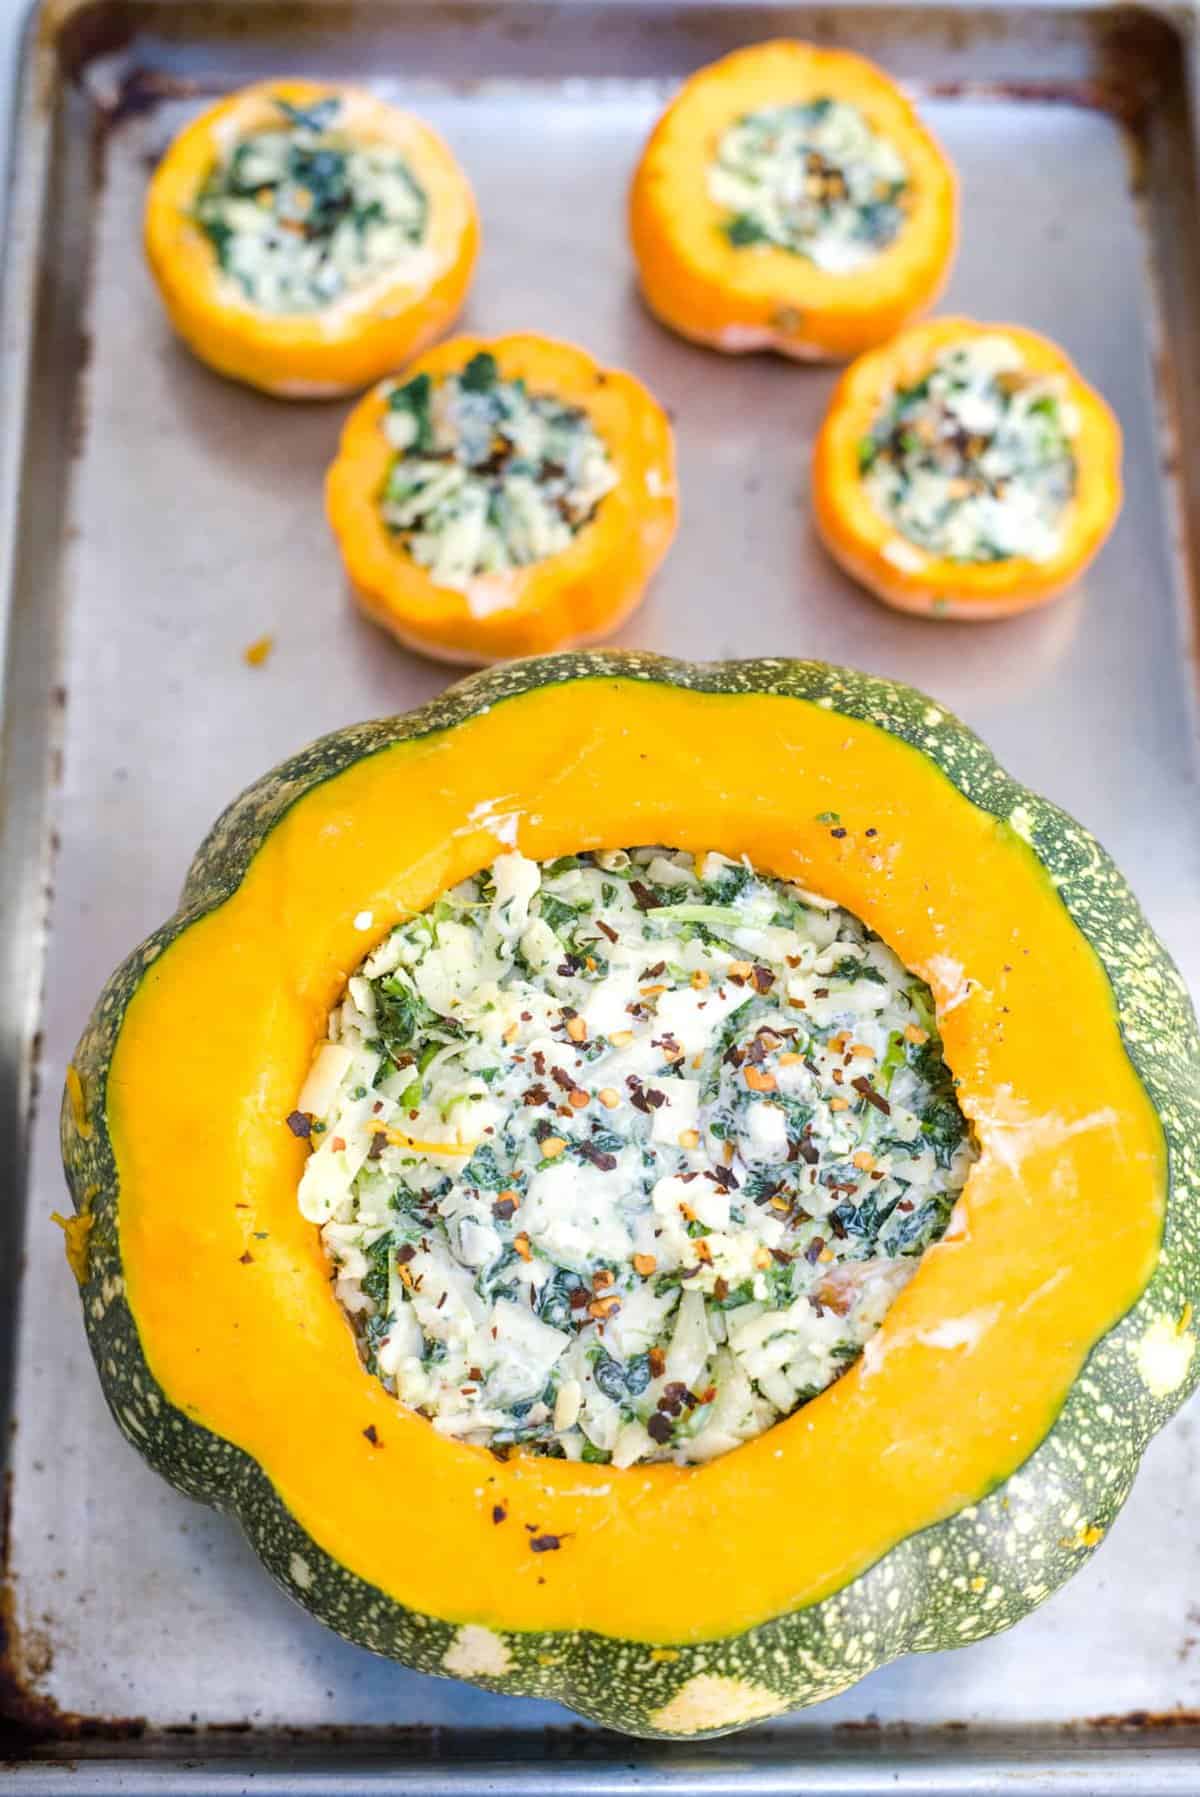 pumpkin with filling